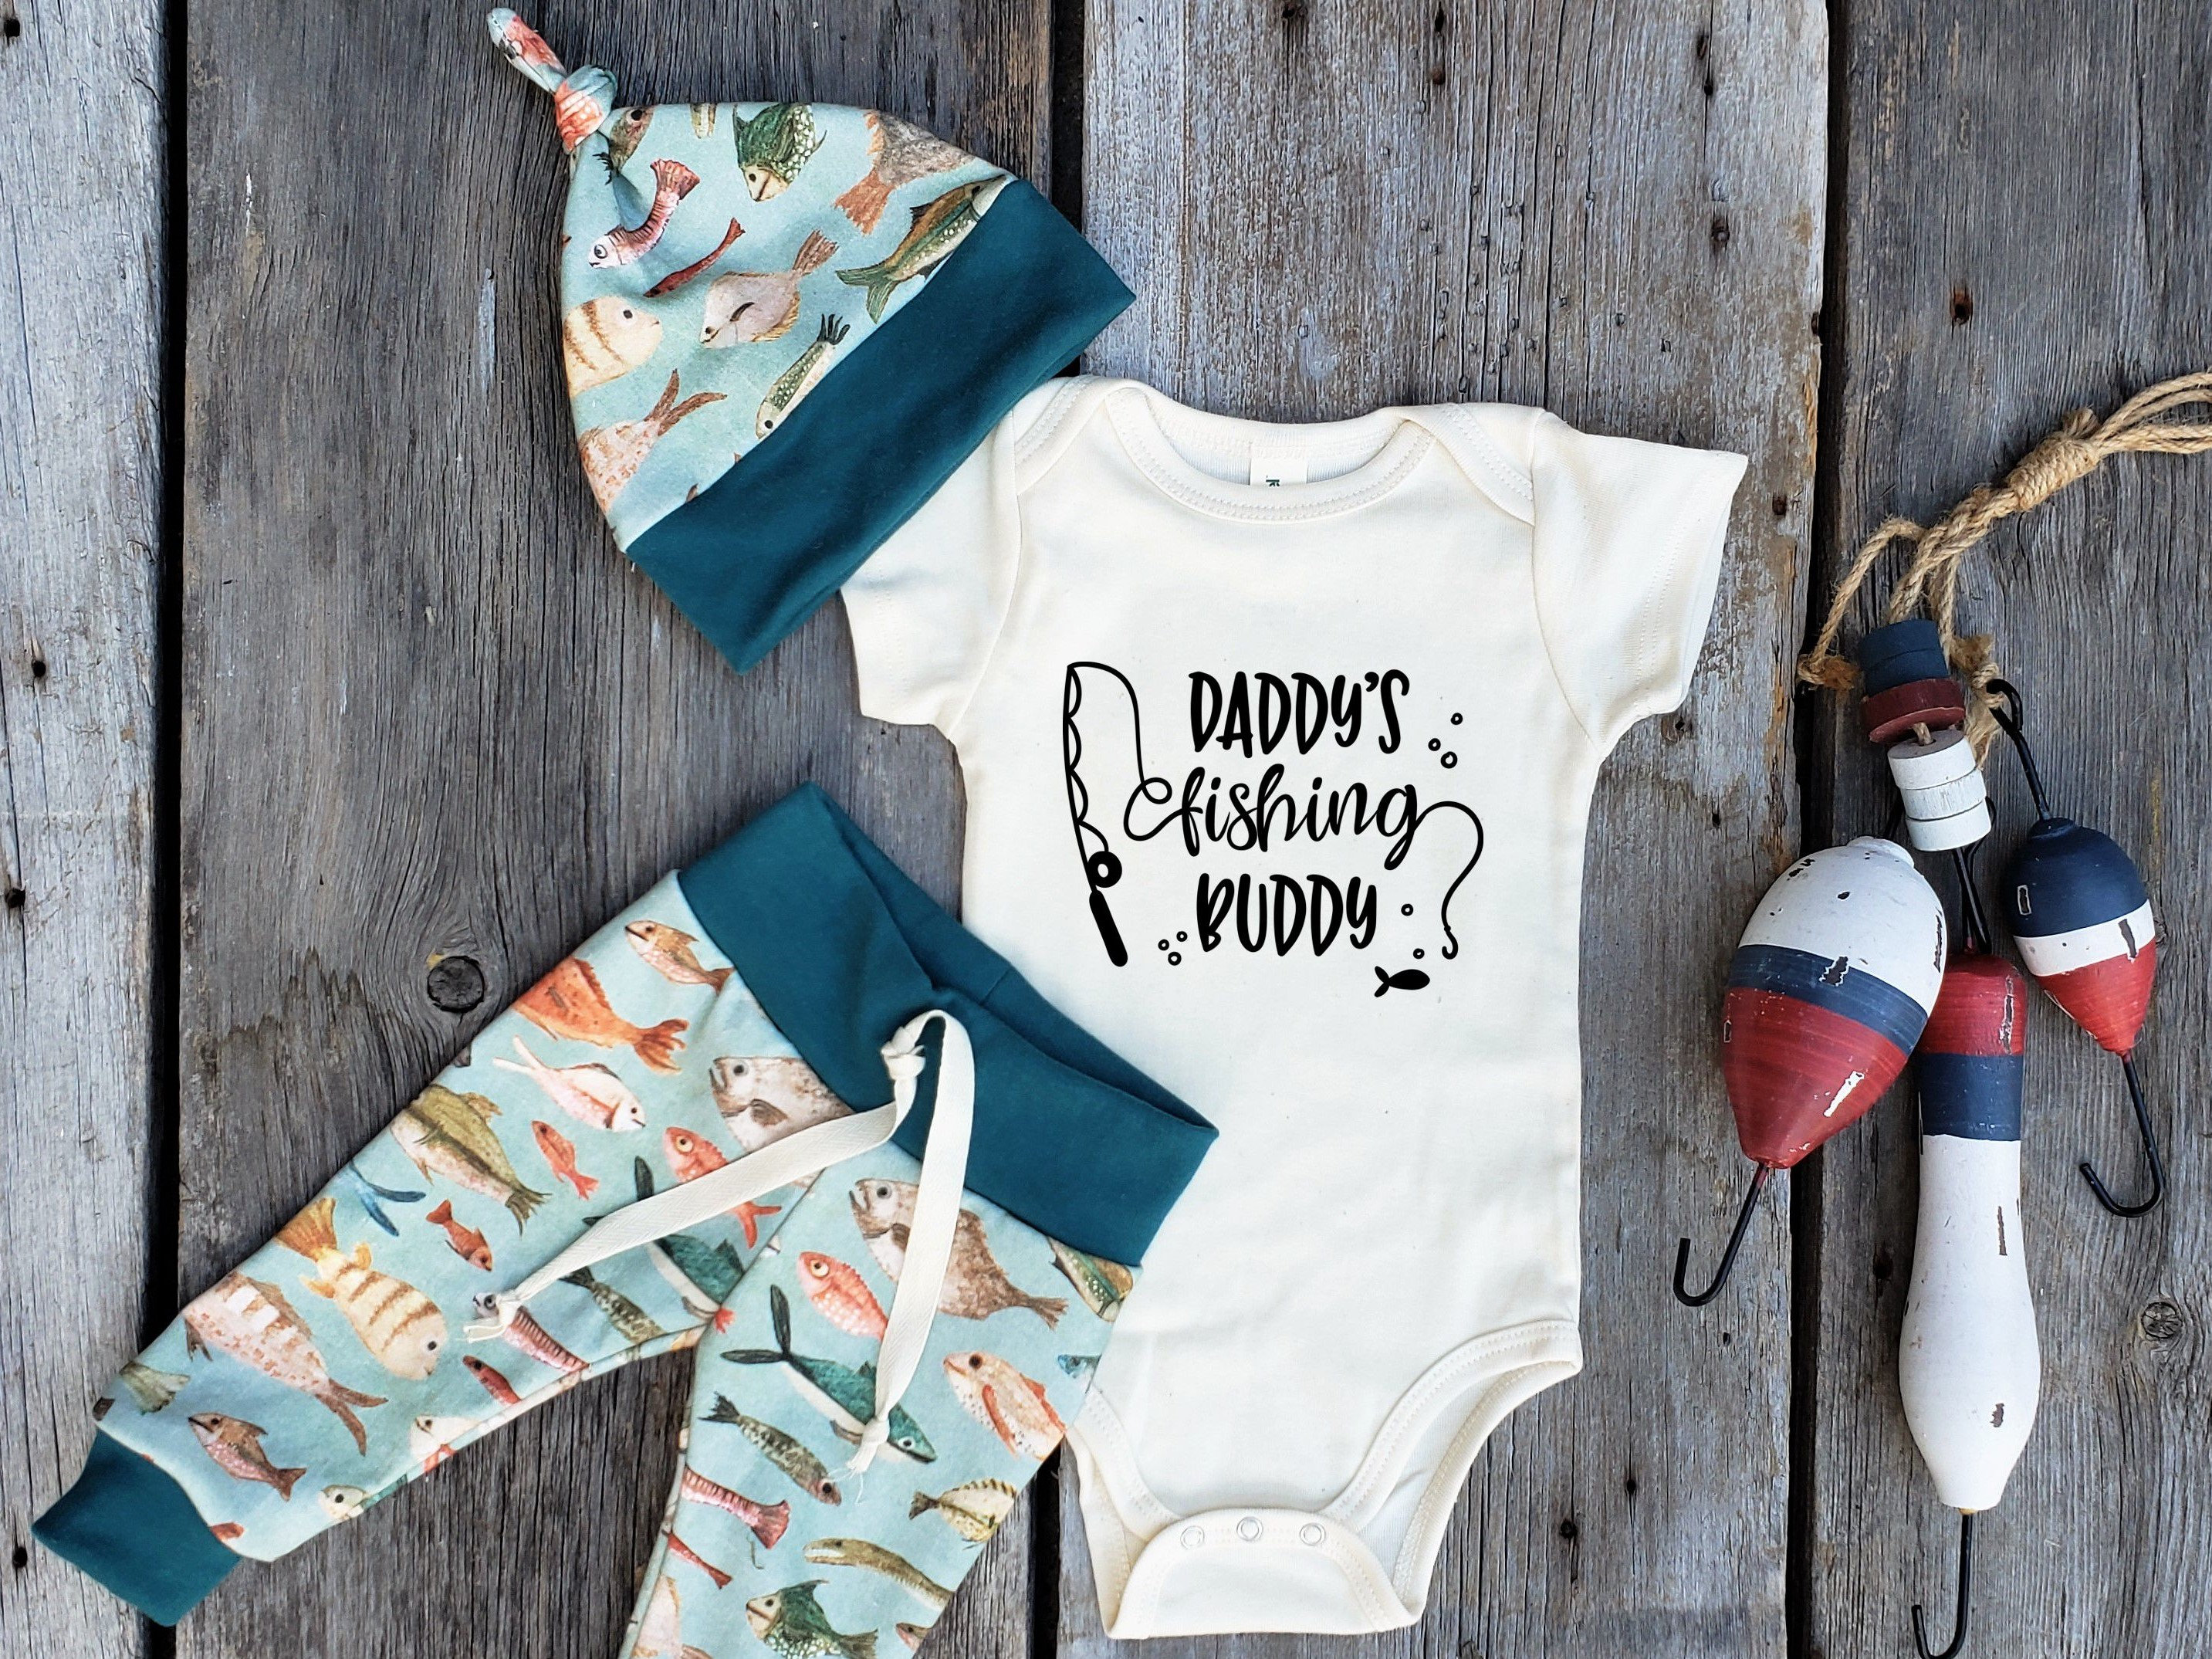 Fishing with the littles!  Southern baby clothes, Baby boy, Baby